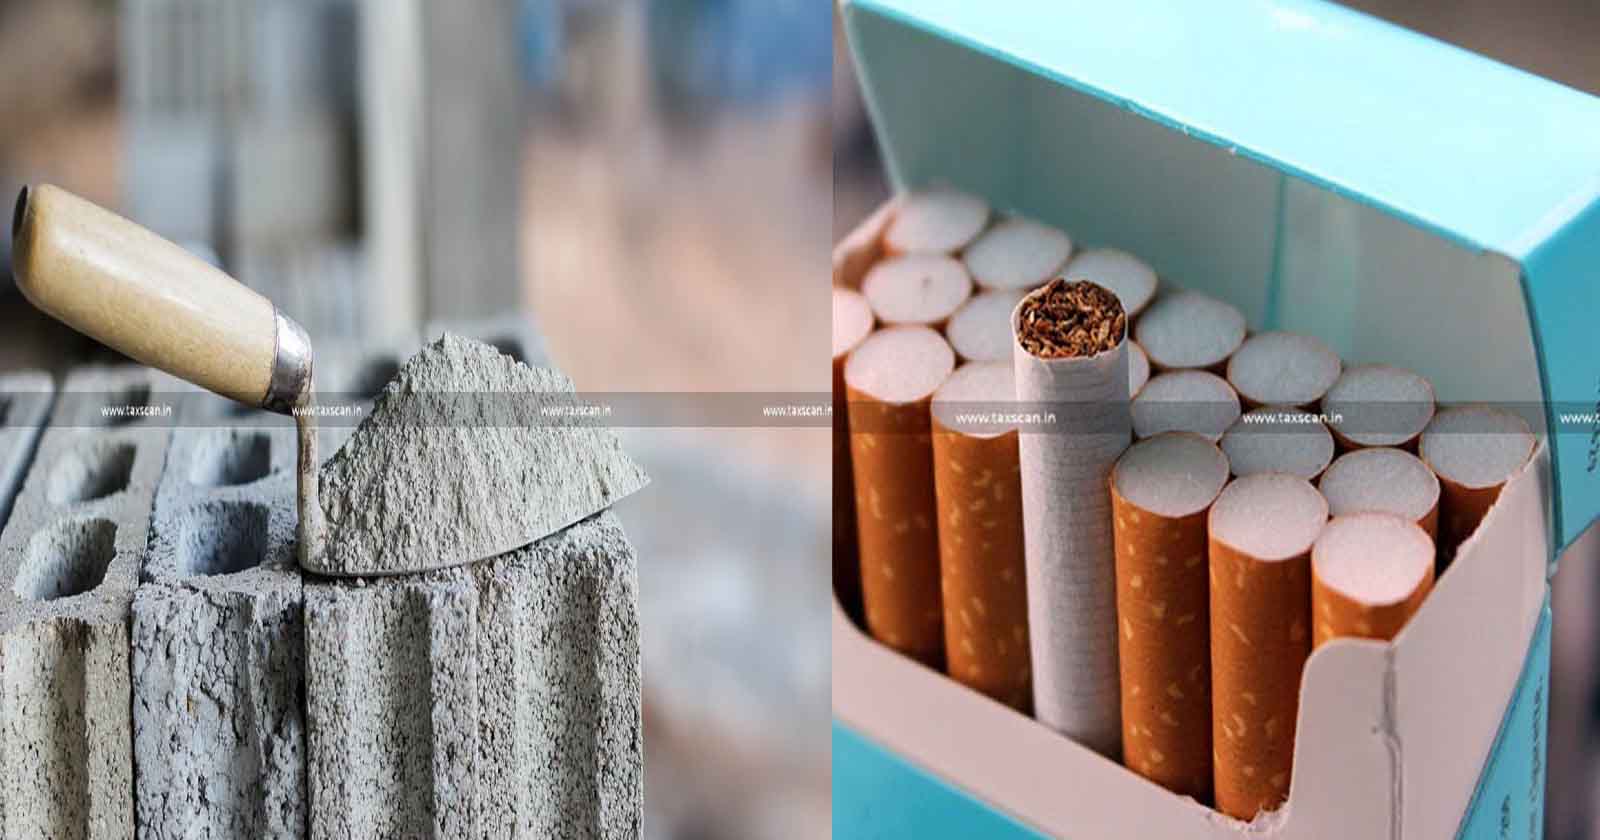 Issuance of refund - Cigarettes and Cement -Punjab and Haryana High Court - TAXSCAN